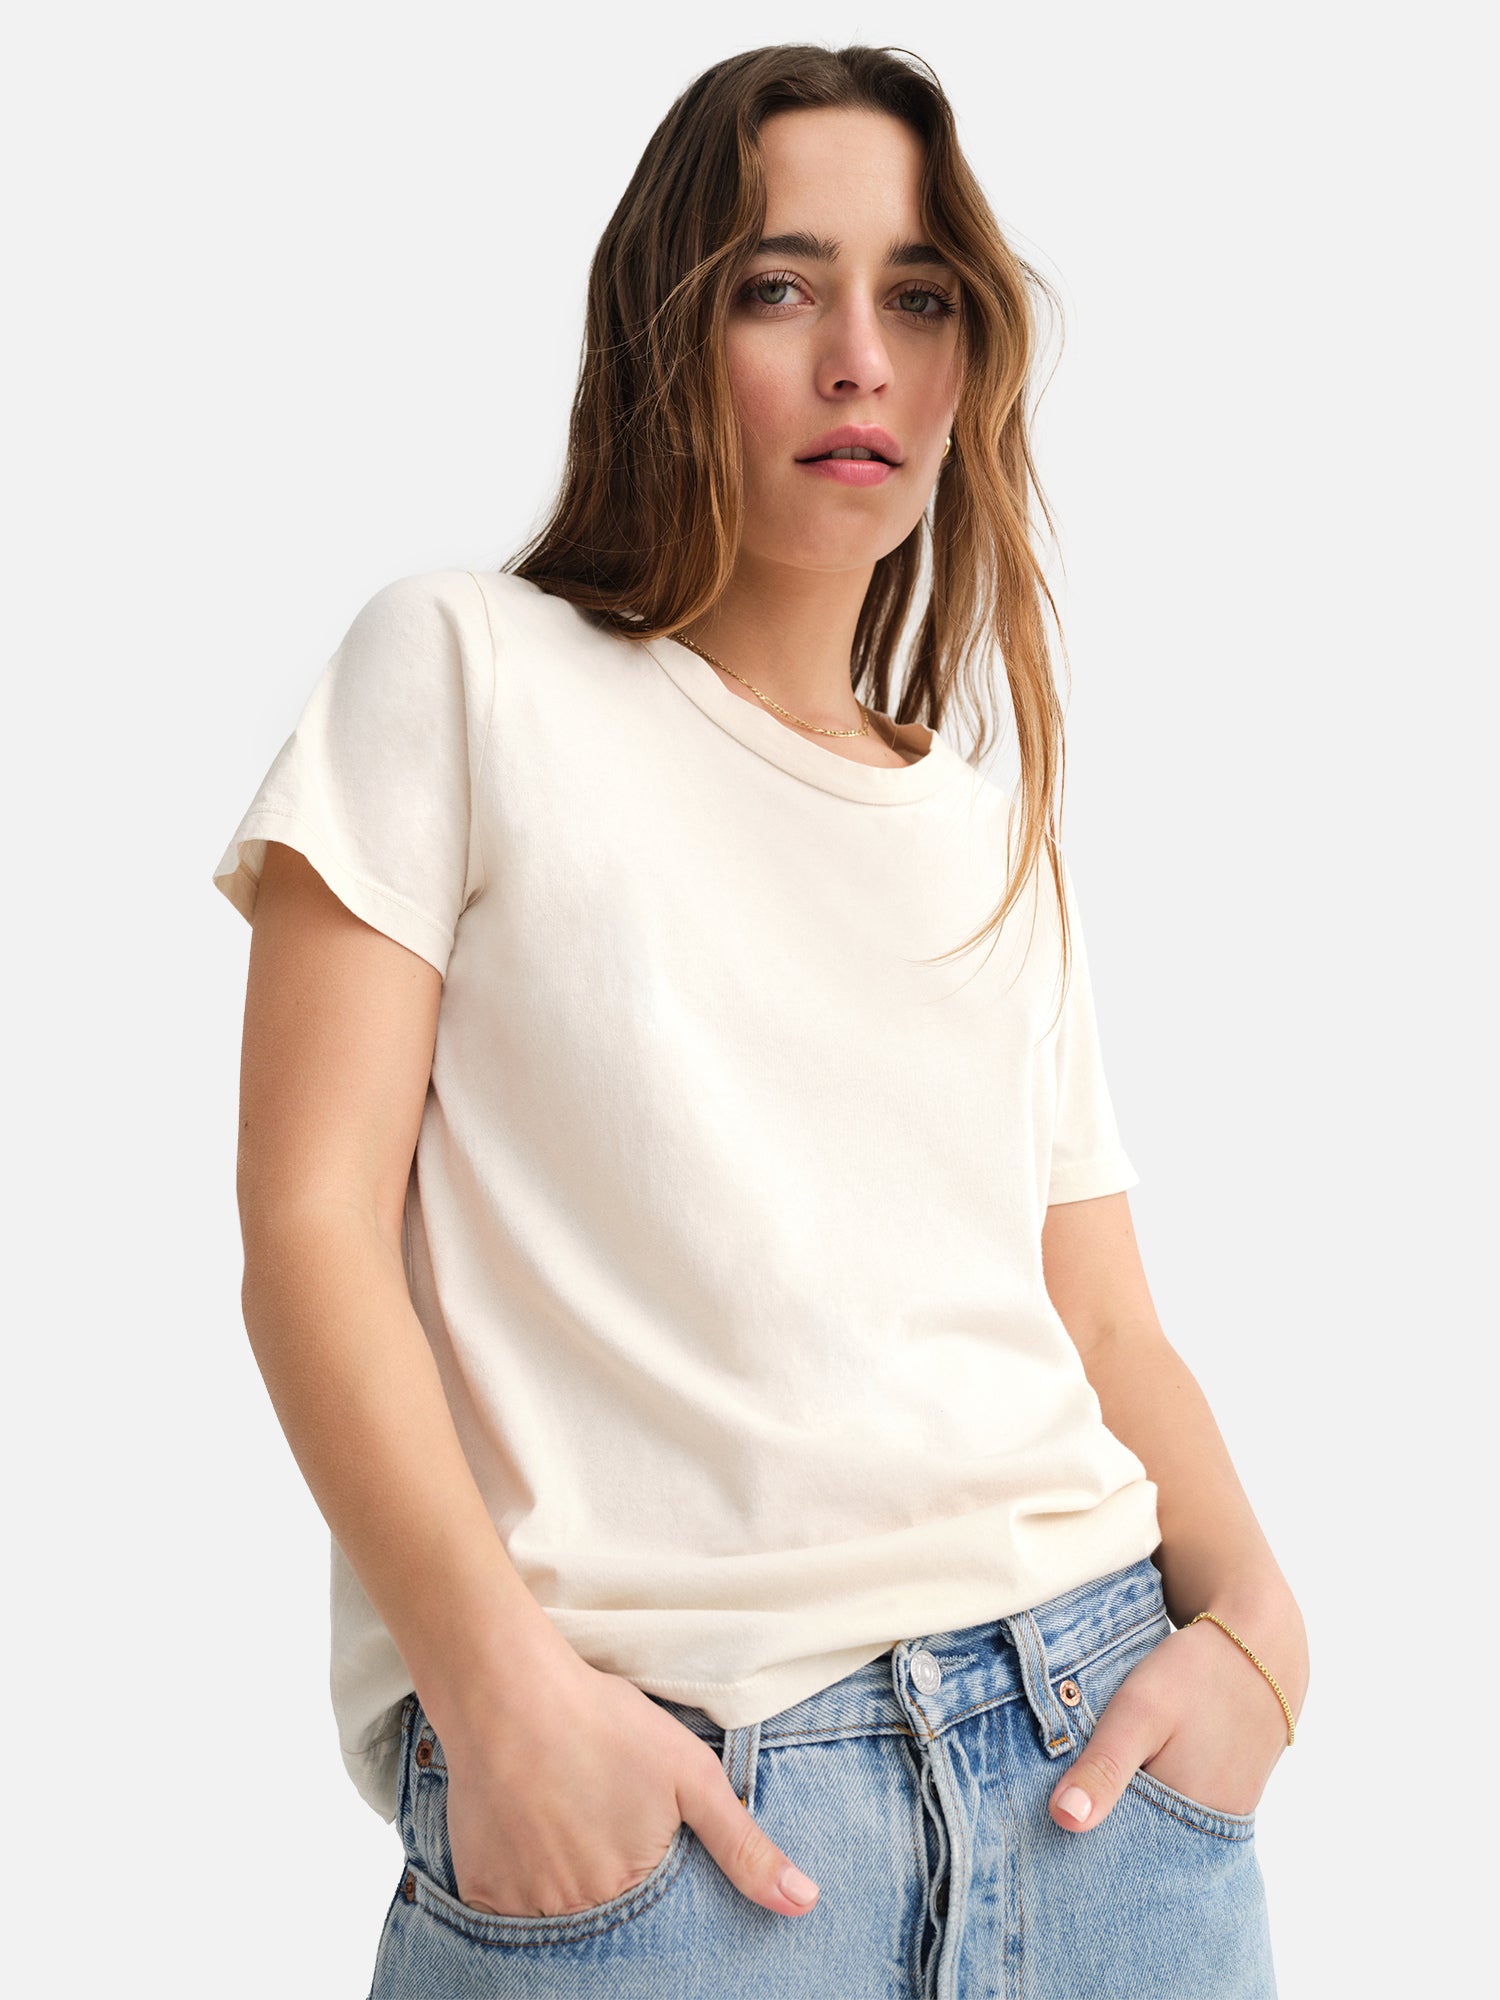 Organic Cotton Tops for Girls, FILTER-TYPE: CAMI TOPS